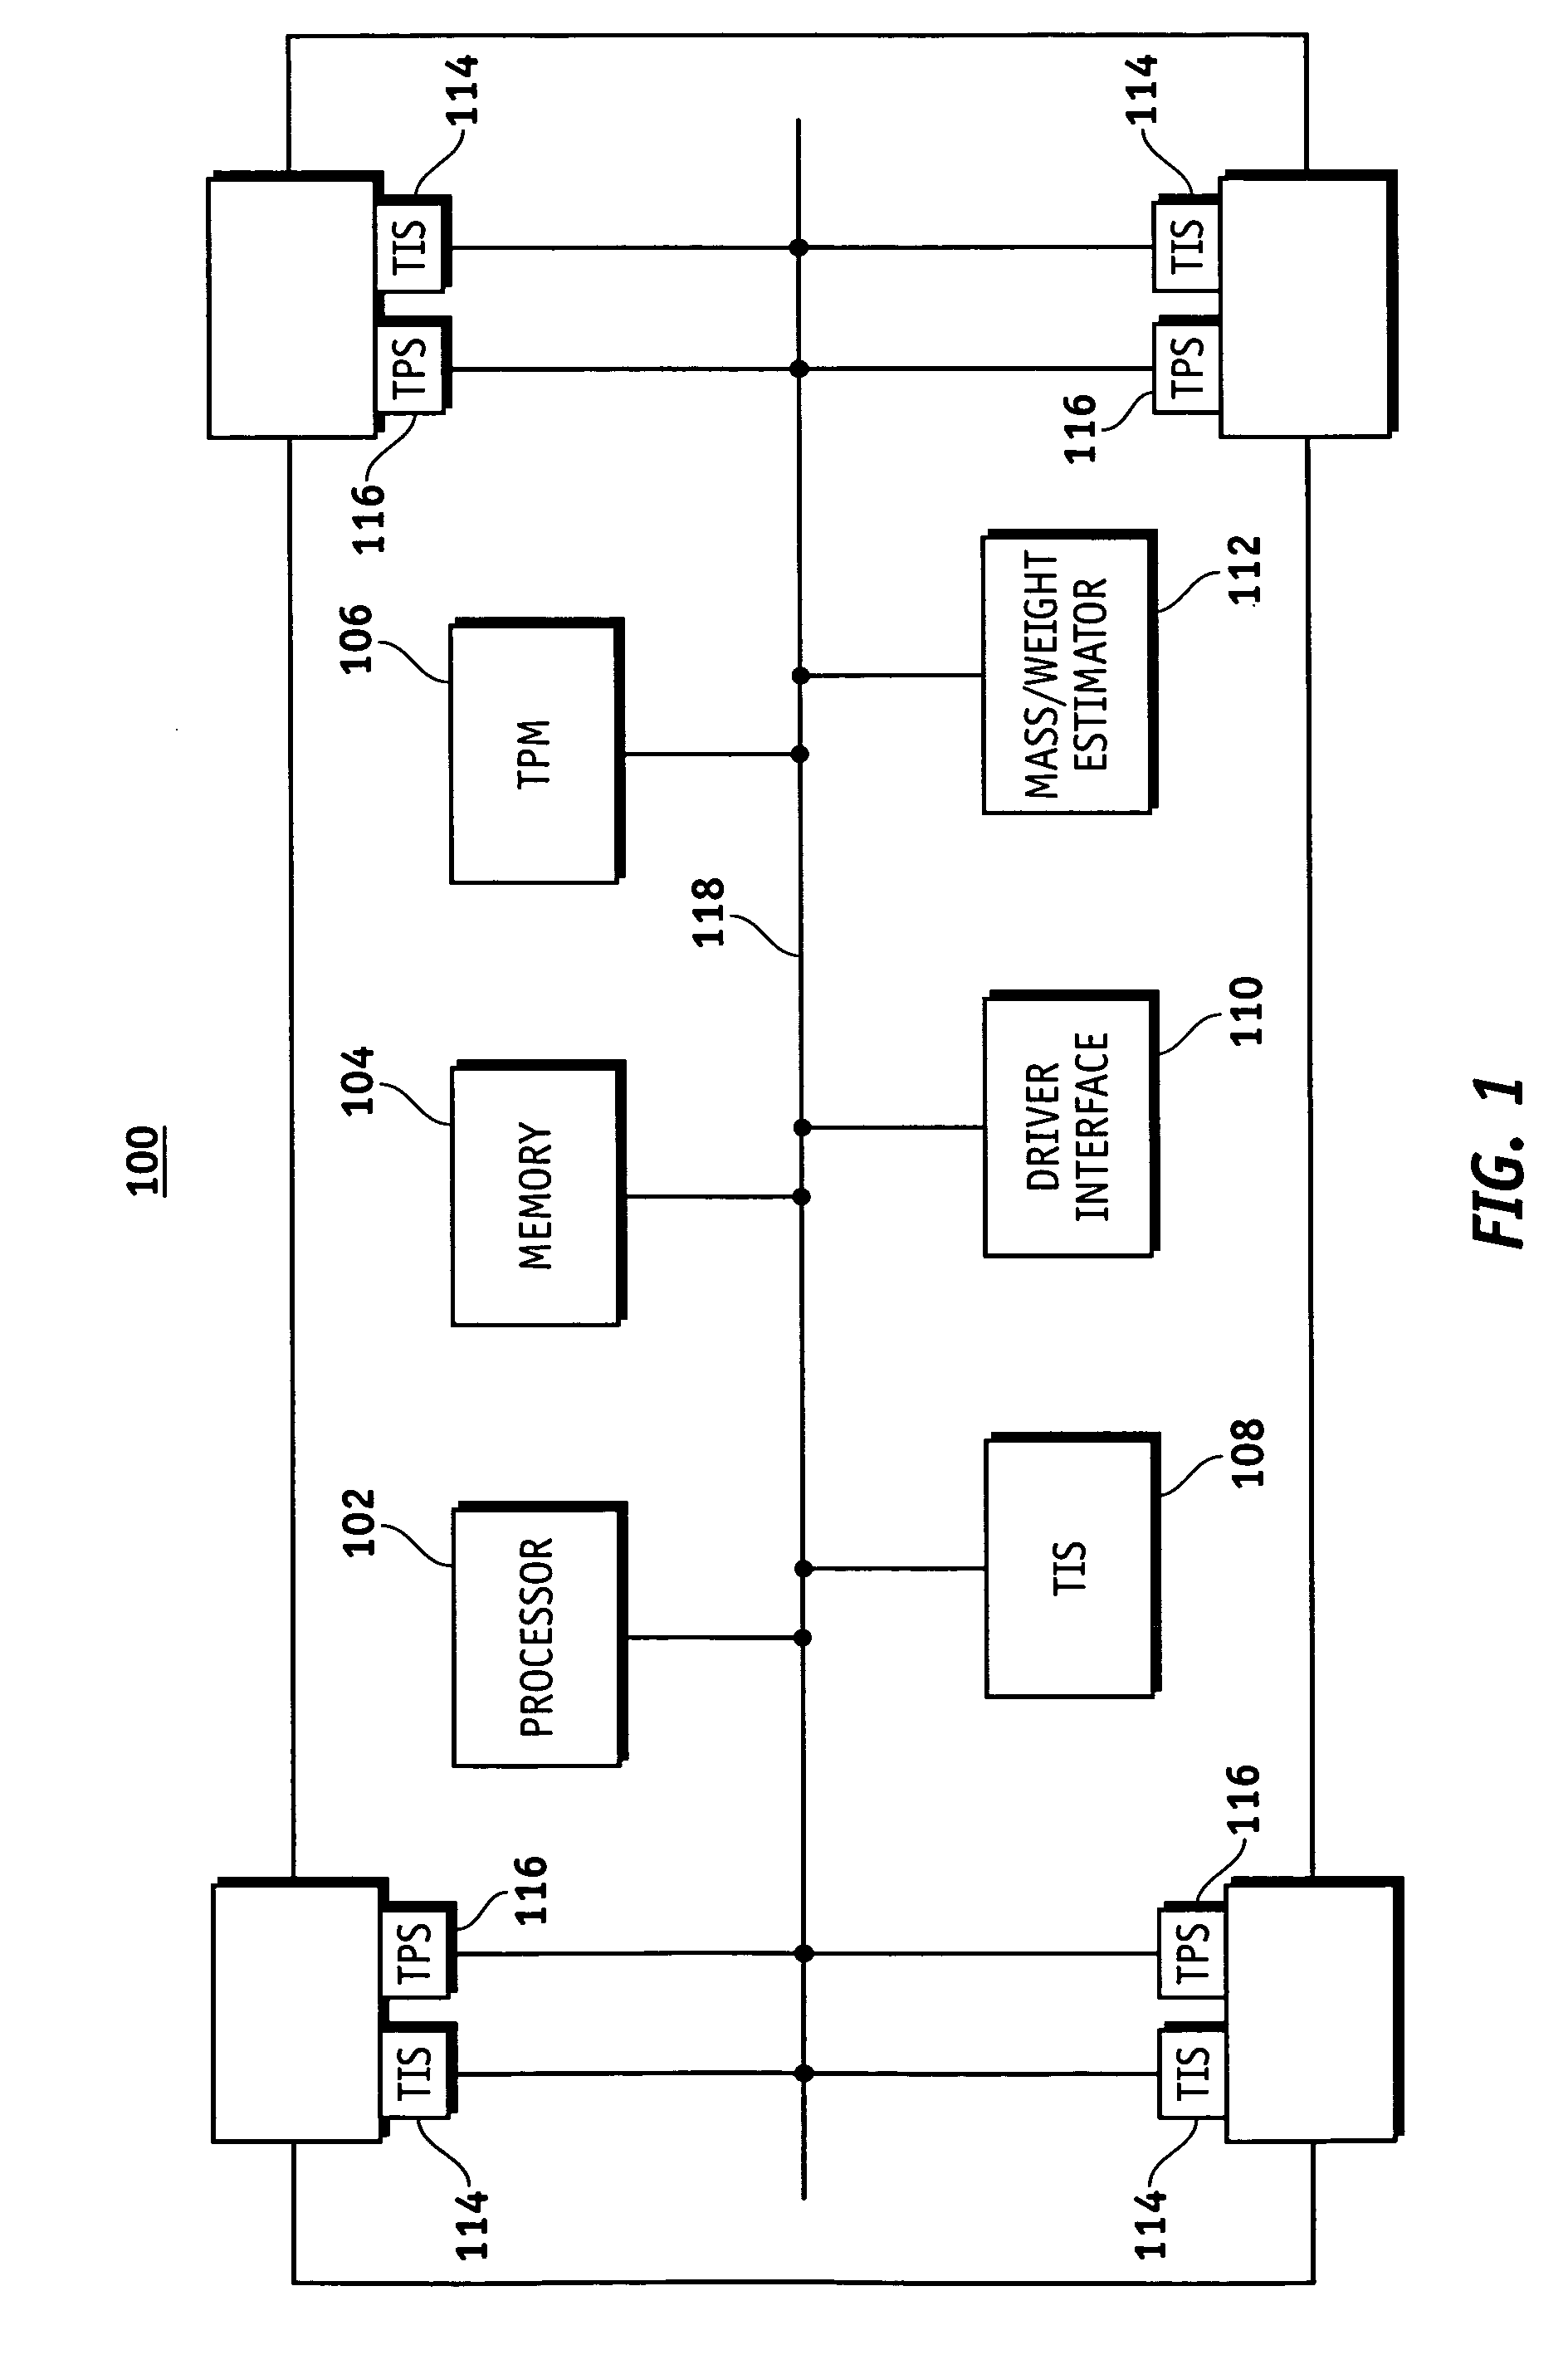 System and method for determining proper tire inflation pressure based on current vehicle mass conditions